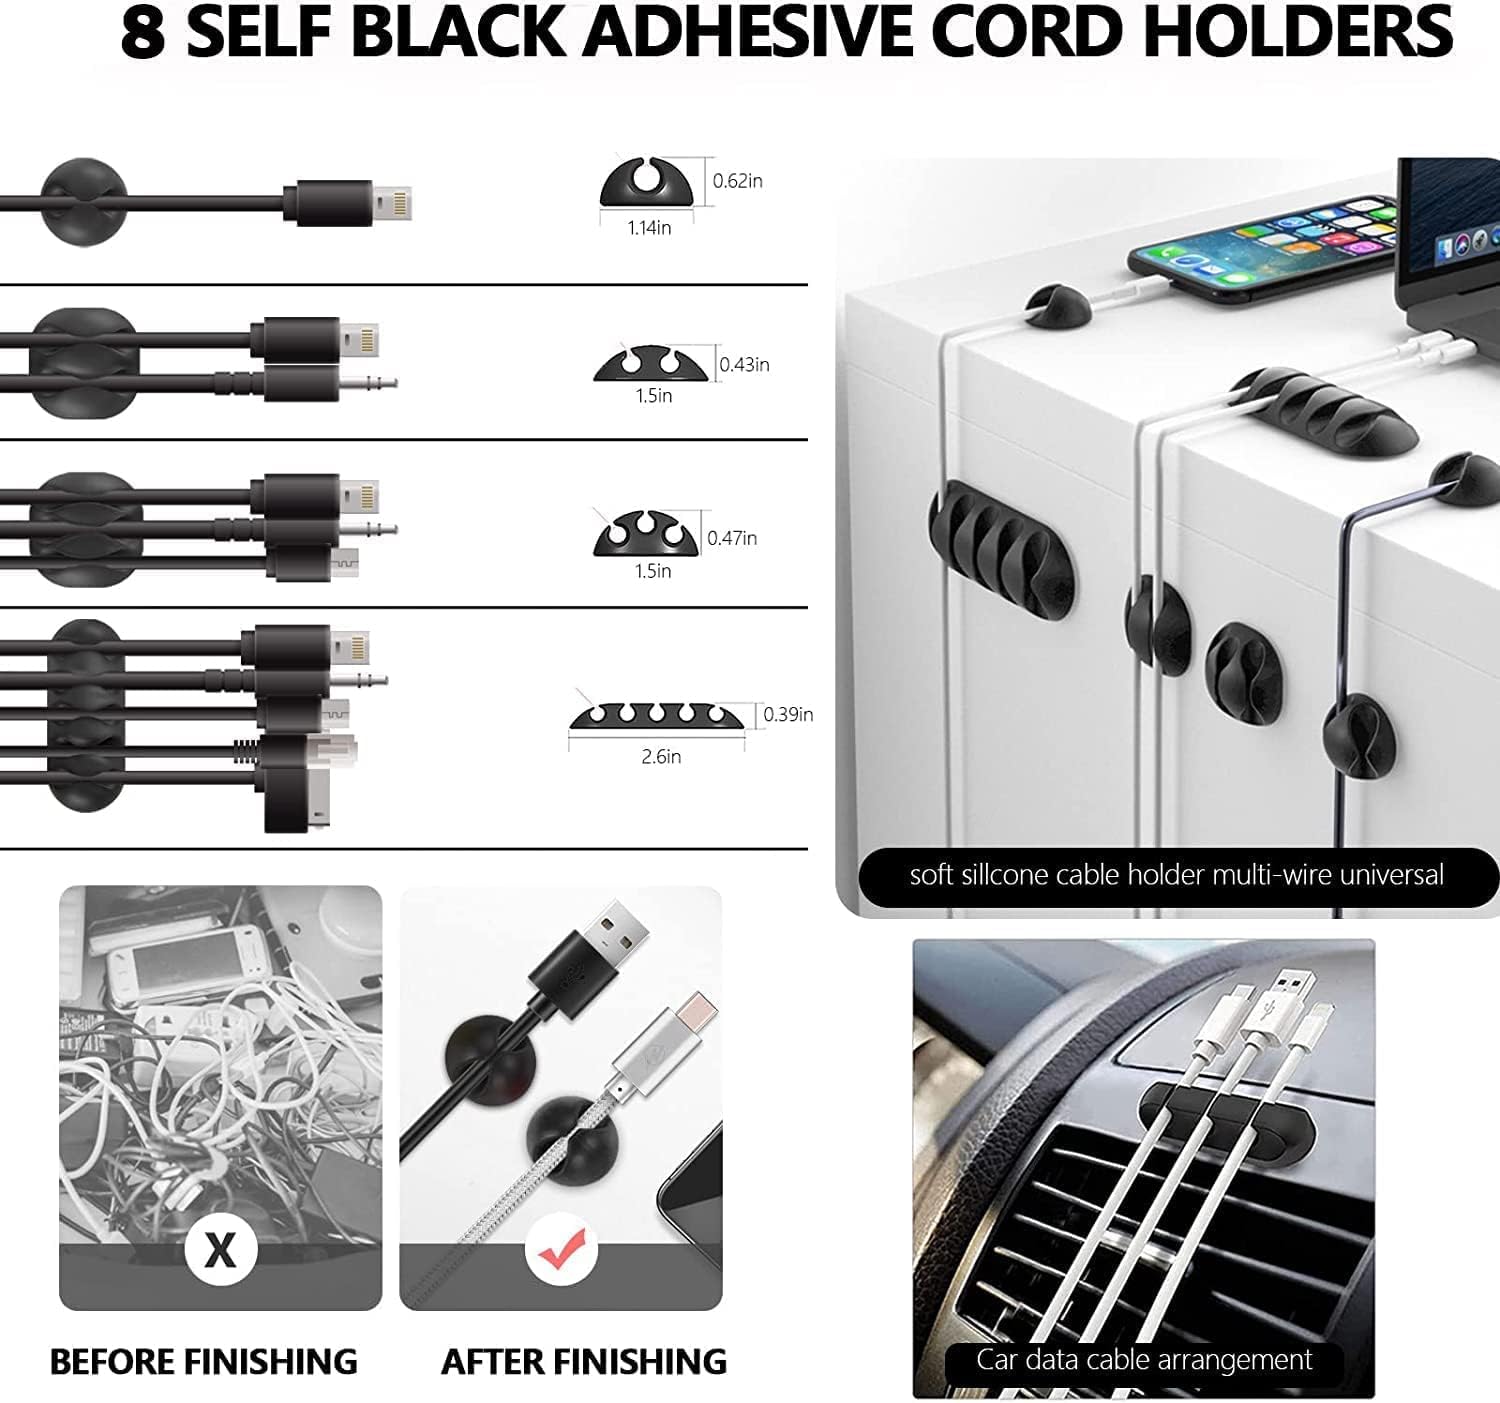 ANYOUI 273 Pcs Cable Management Organizer Kit, Cable Organizer for Home and Office. Useful for Power Cord, Desktop Cable Clips Bundle, USB Cable, TV Cable, PC, Home Office Cord Holder for Desk etc